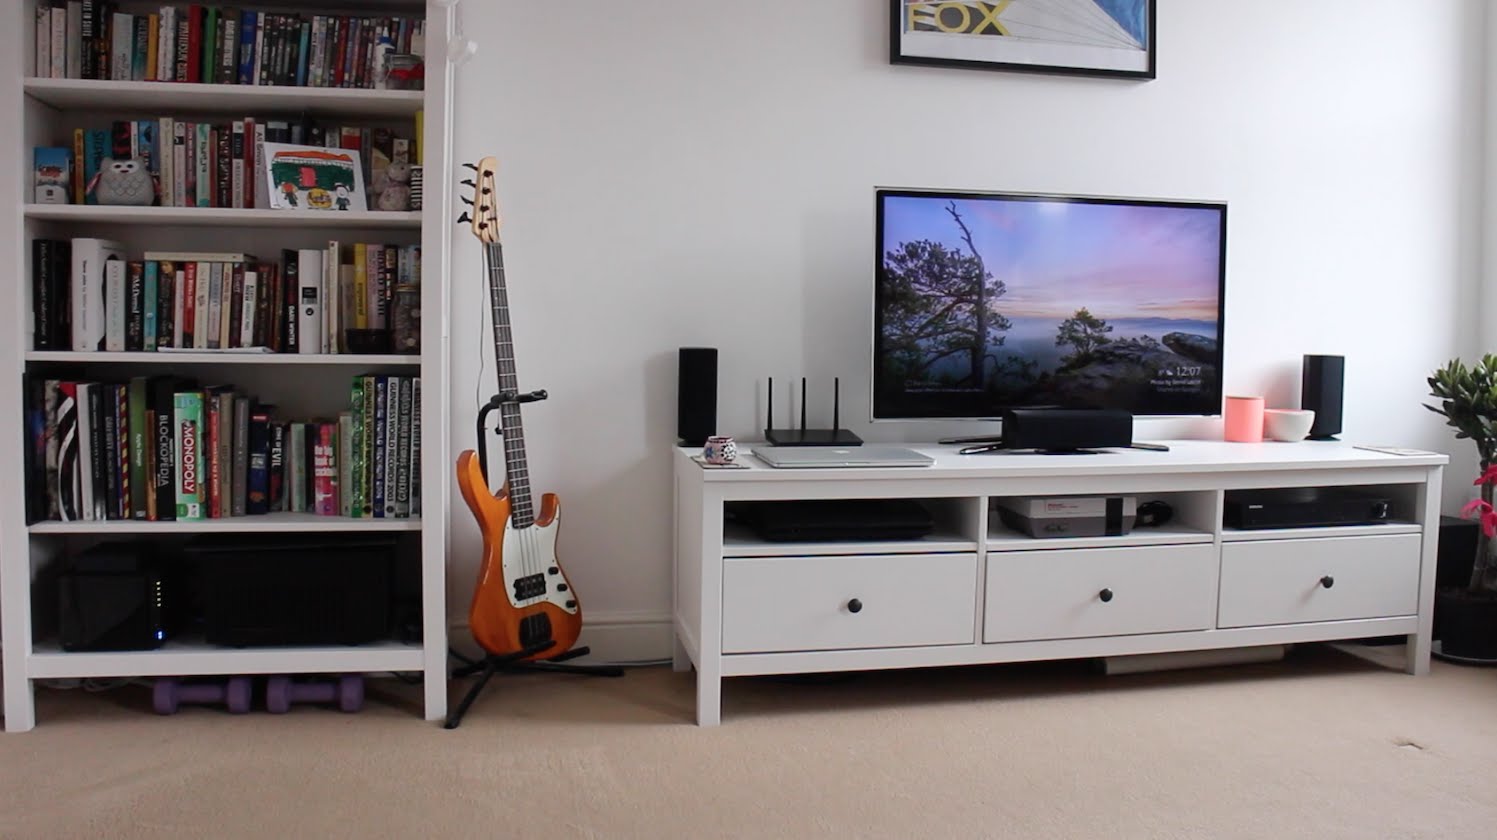 How To Take Your Basic Home Theatre To The Next Level Best Buy Blog